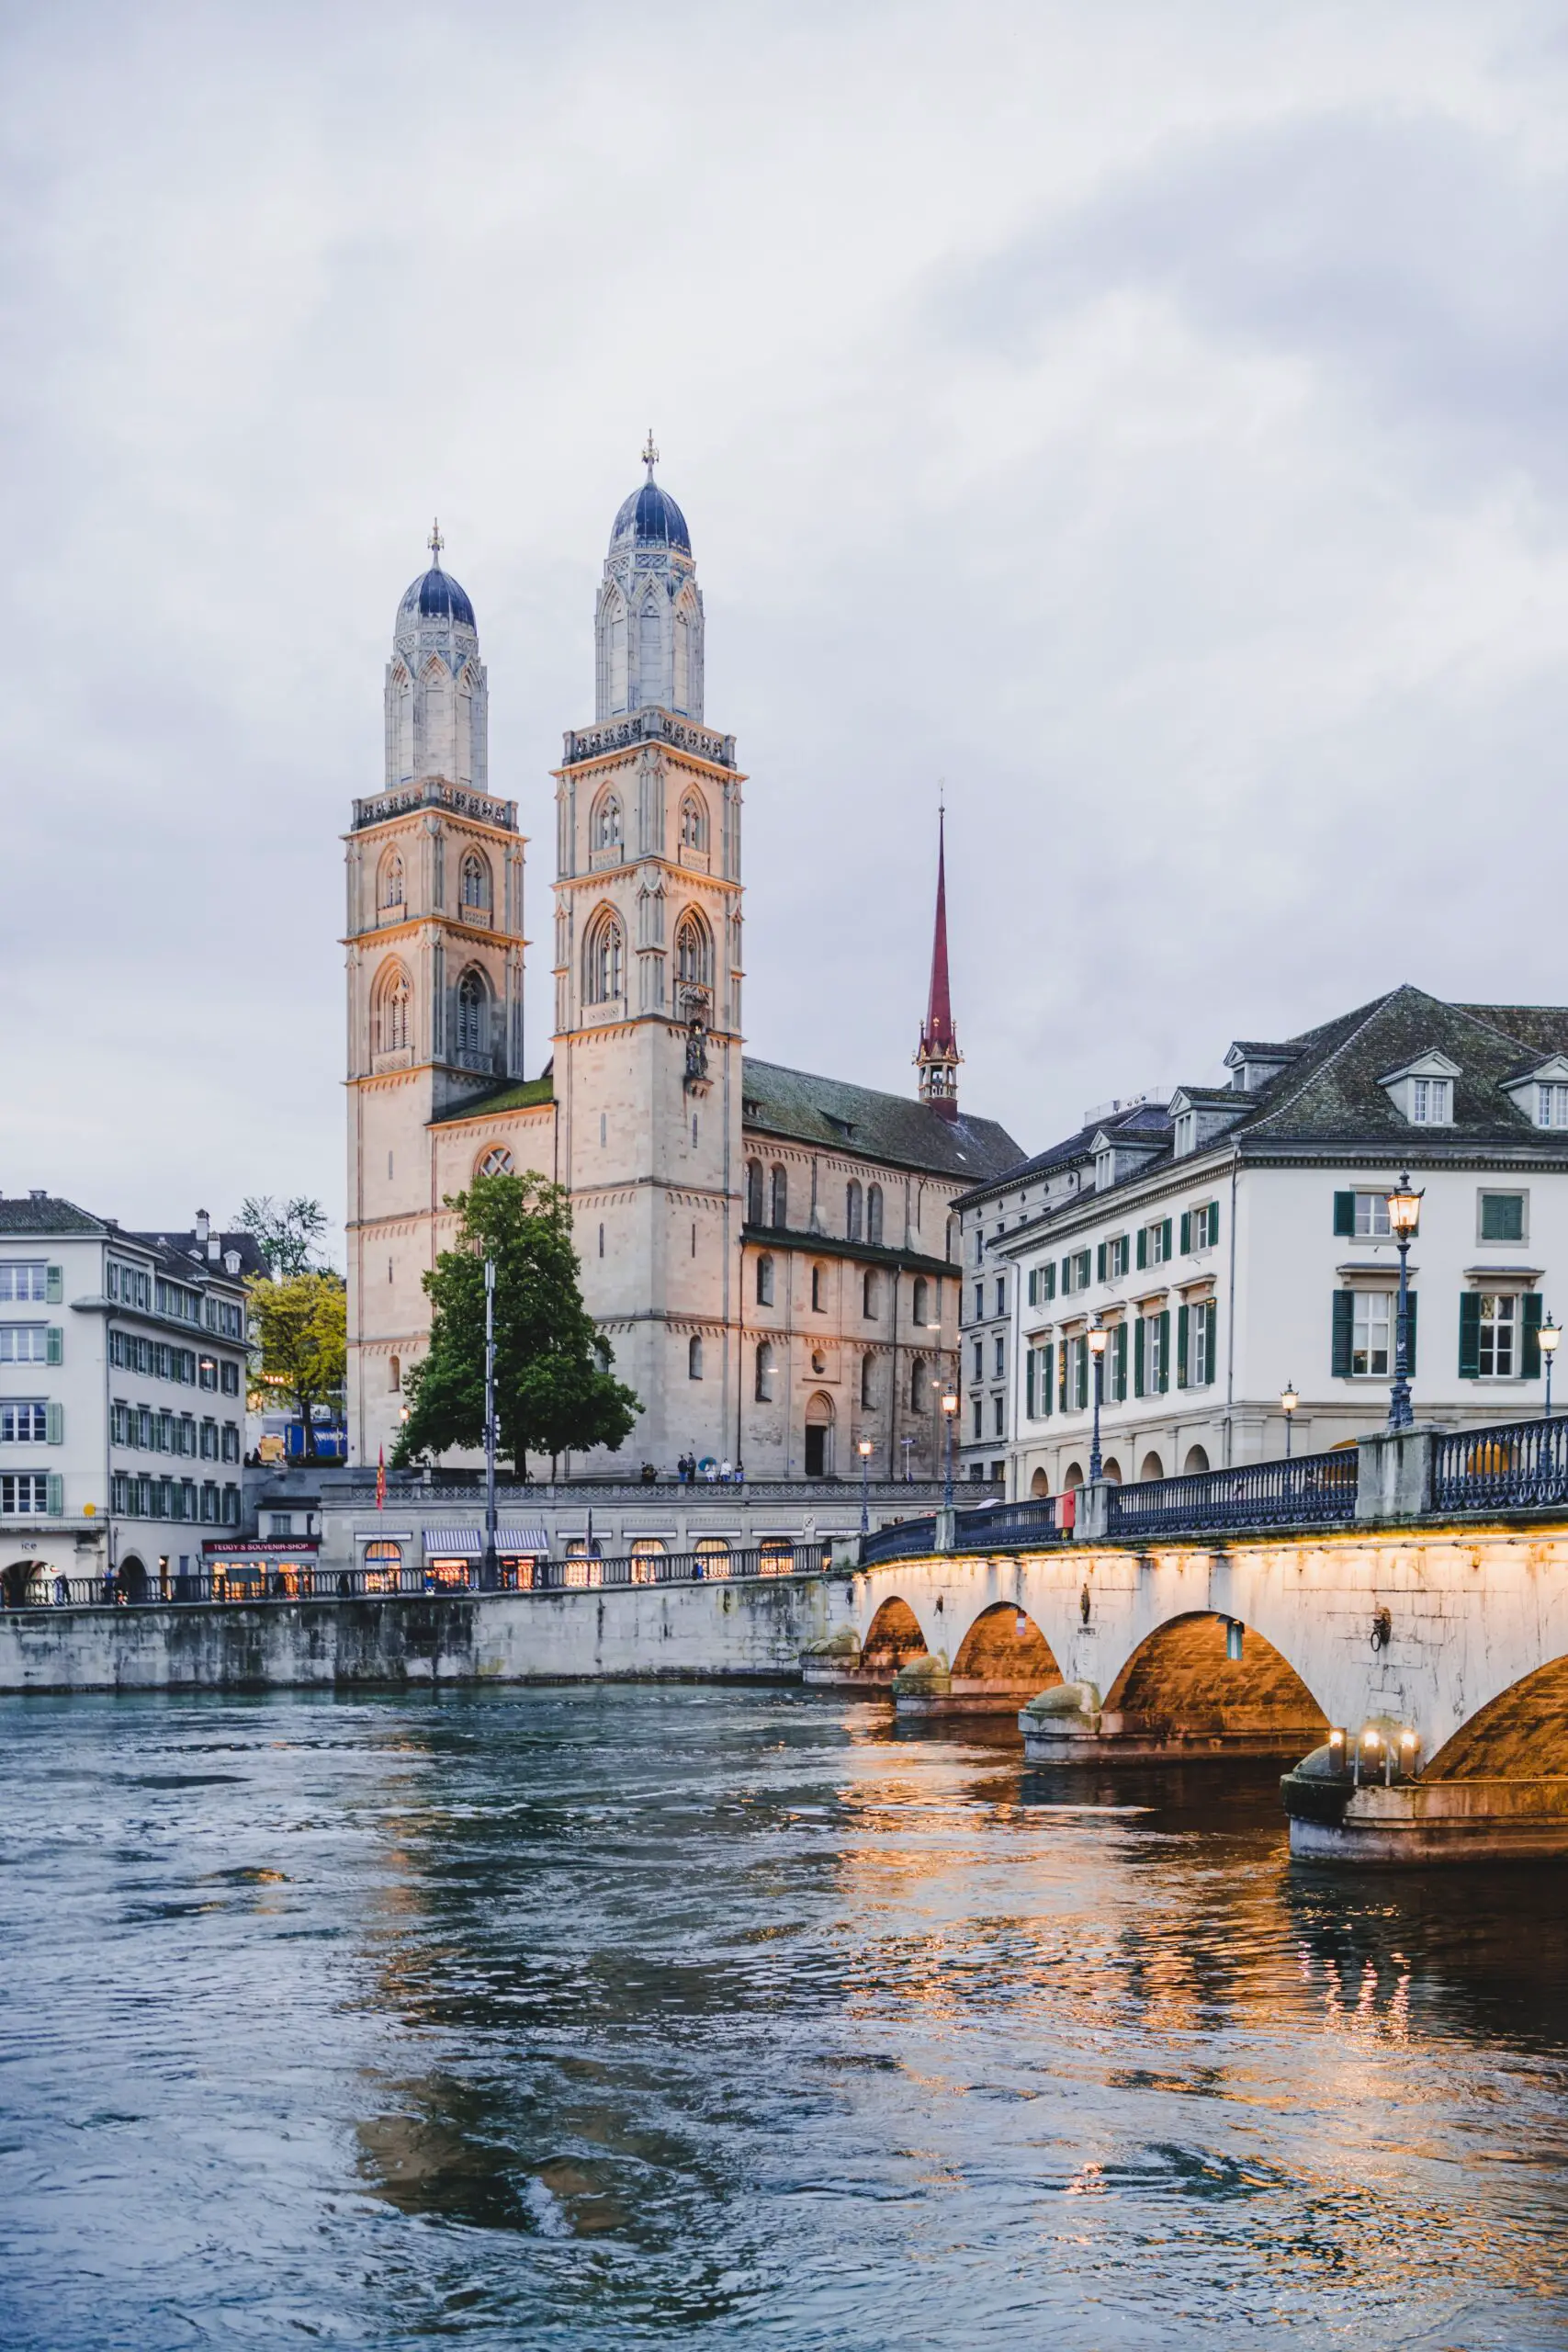 A view of the Grossmünster church in Zurich, Switzerland. The church has two twin towers and is located on the banks of the Limmat river.